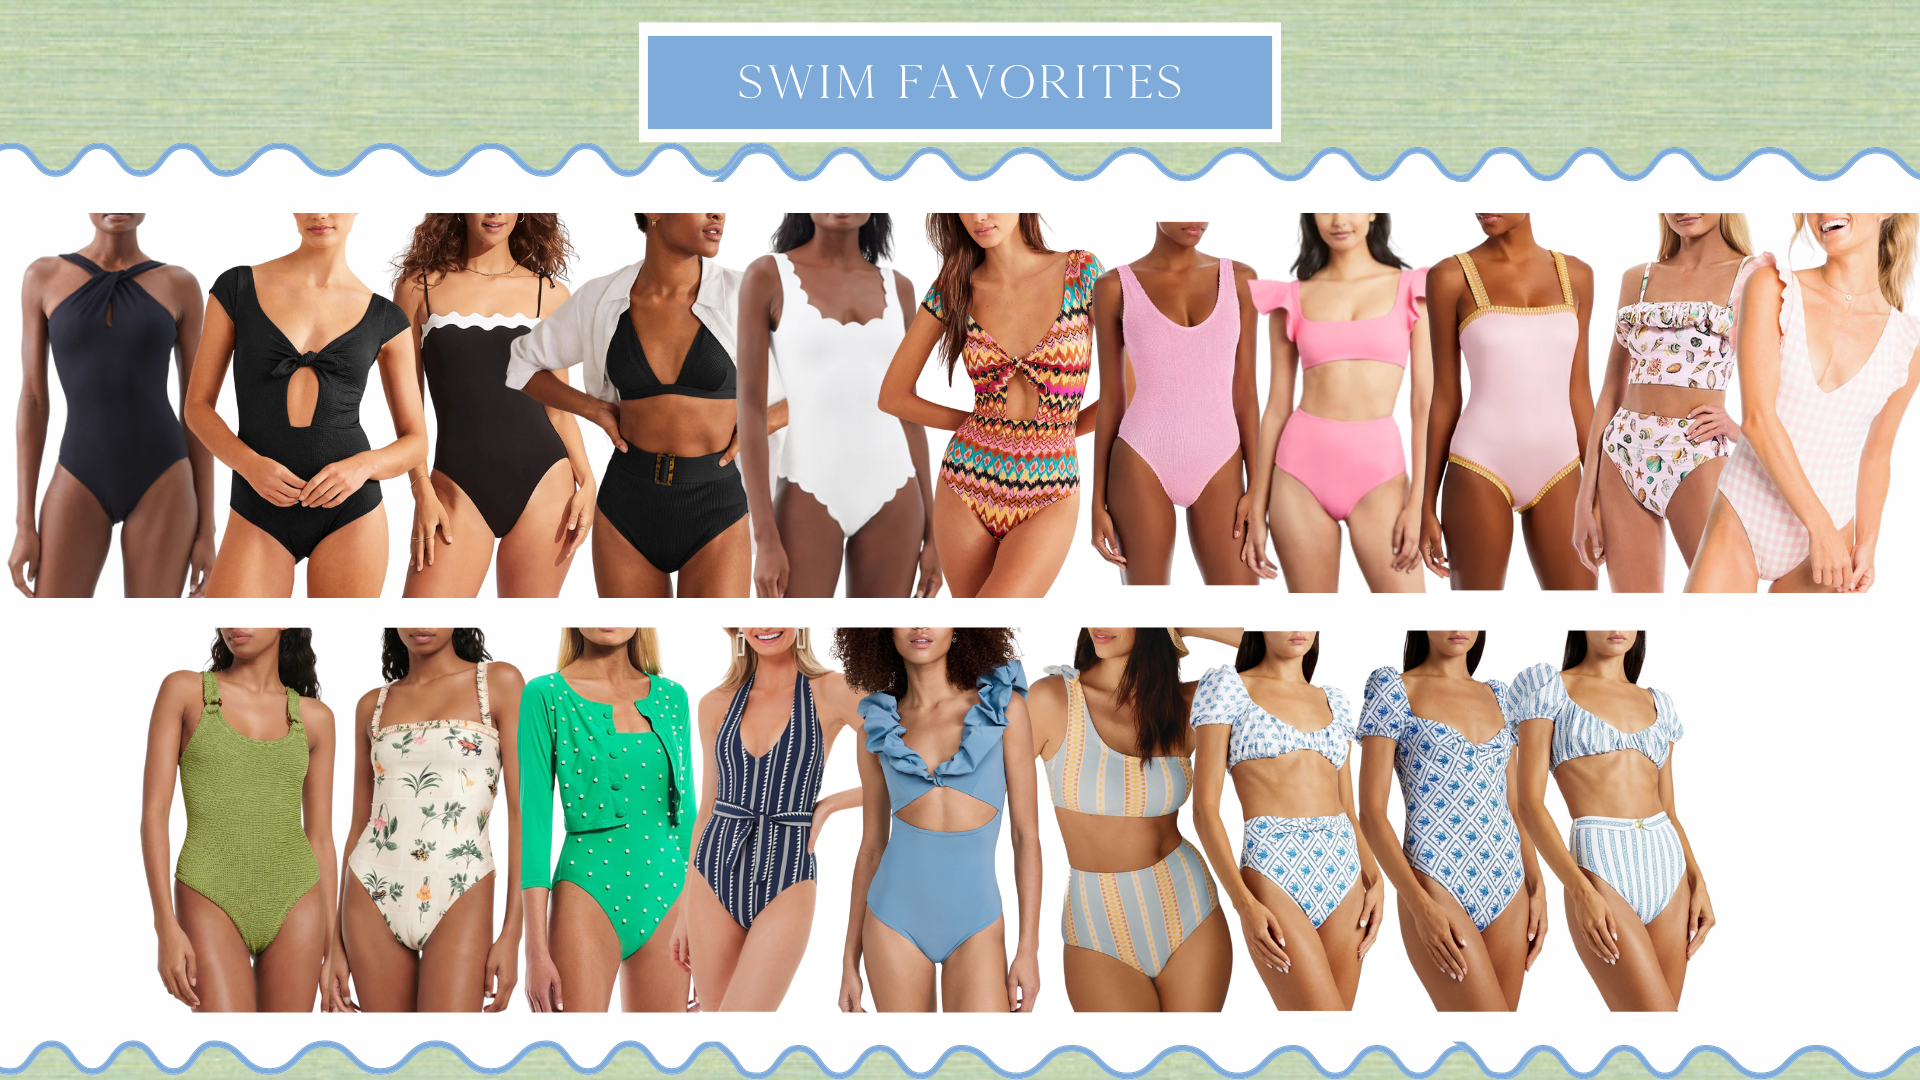 Battle of the bathing suit: one-piece vs. two-pieces - The Daily